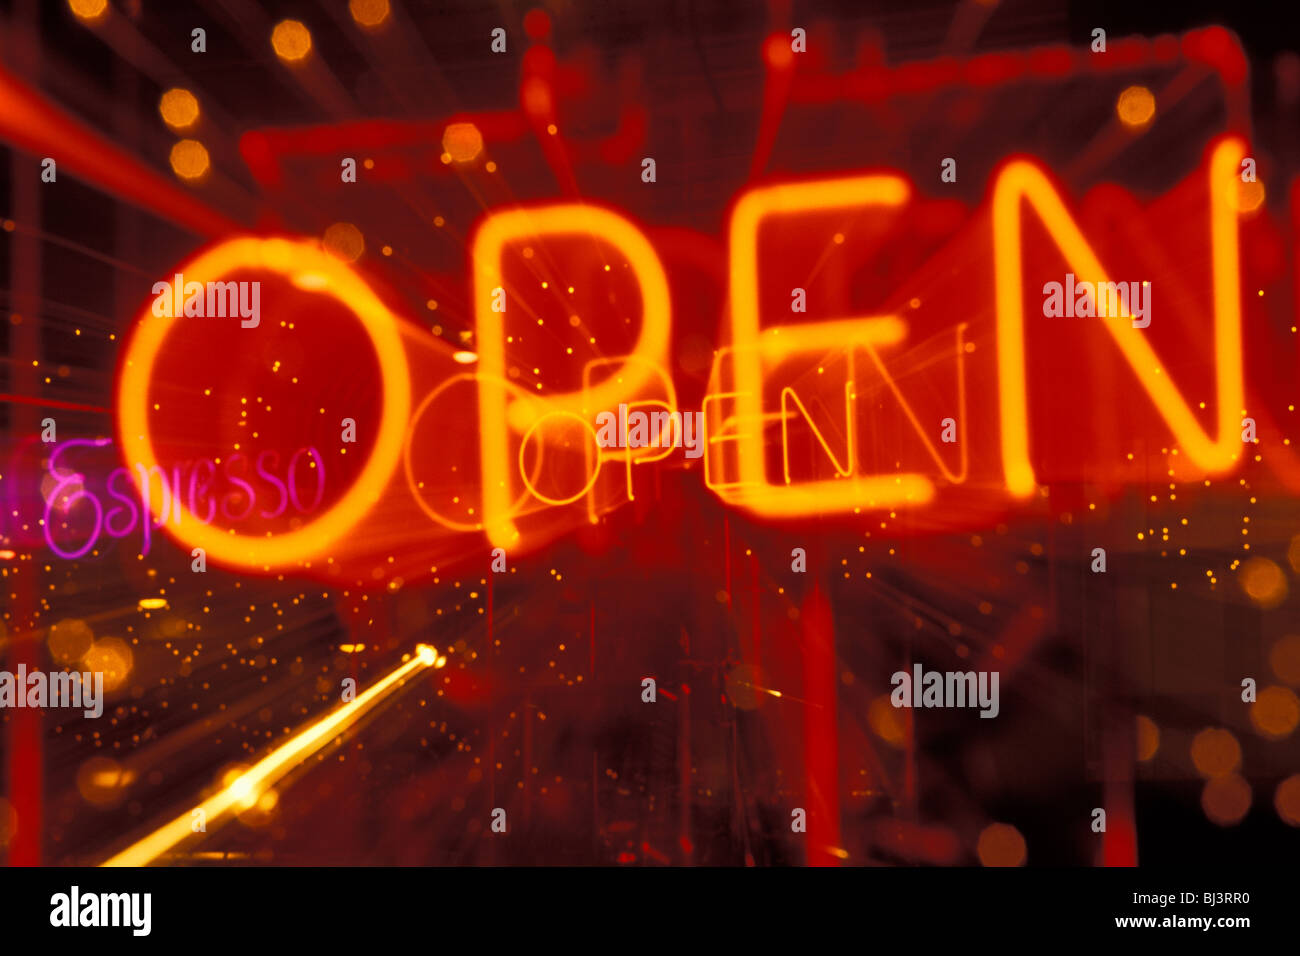 Zoom-blur image of Neon Open sign Stock Photo